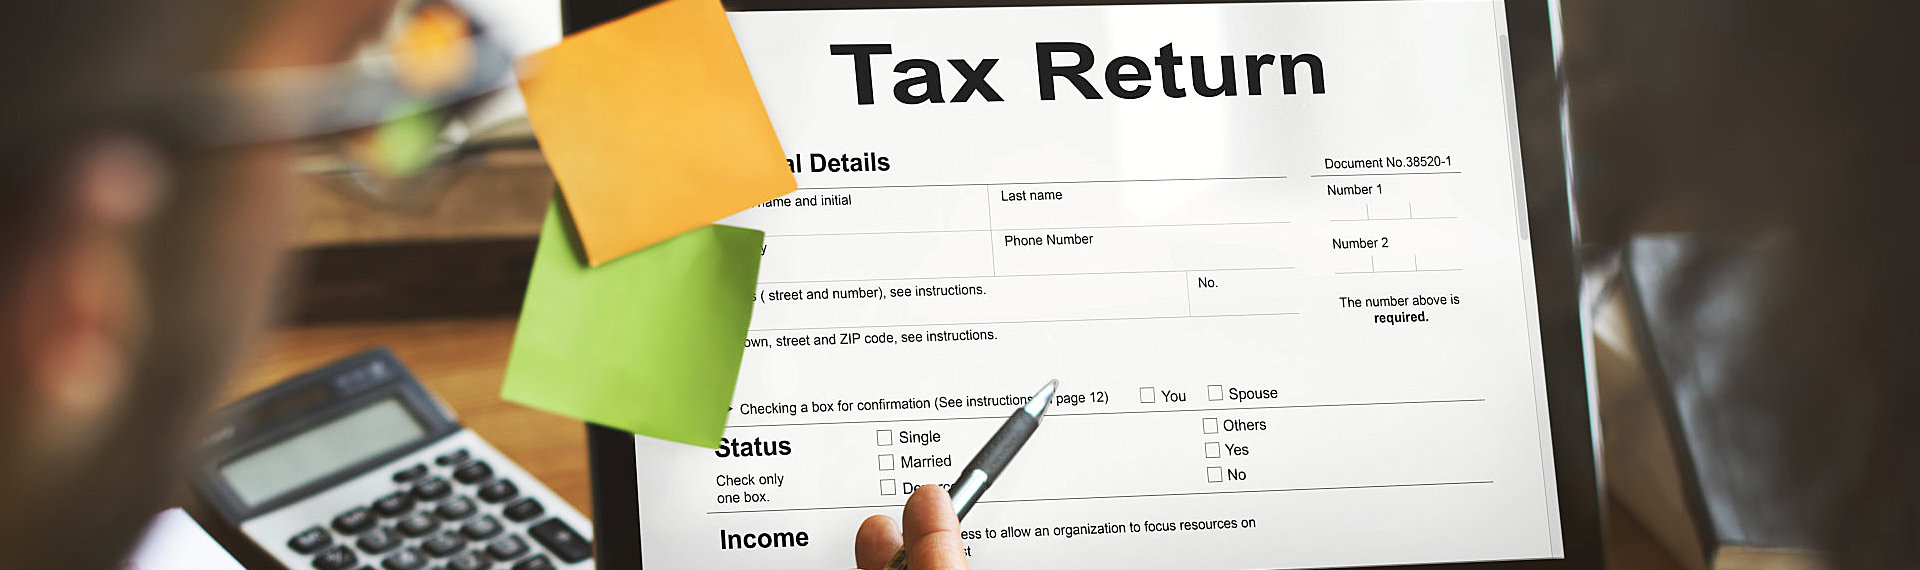 Tax return form in a tablet